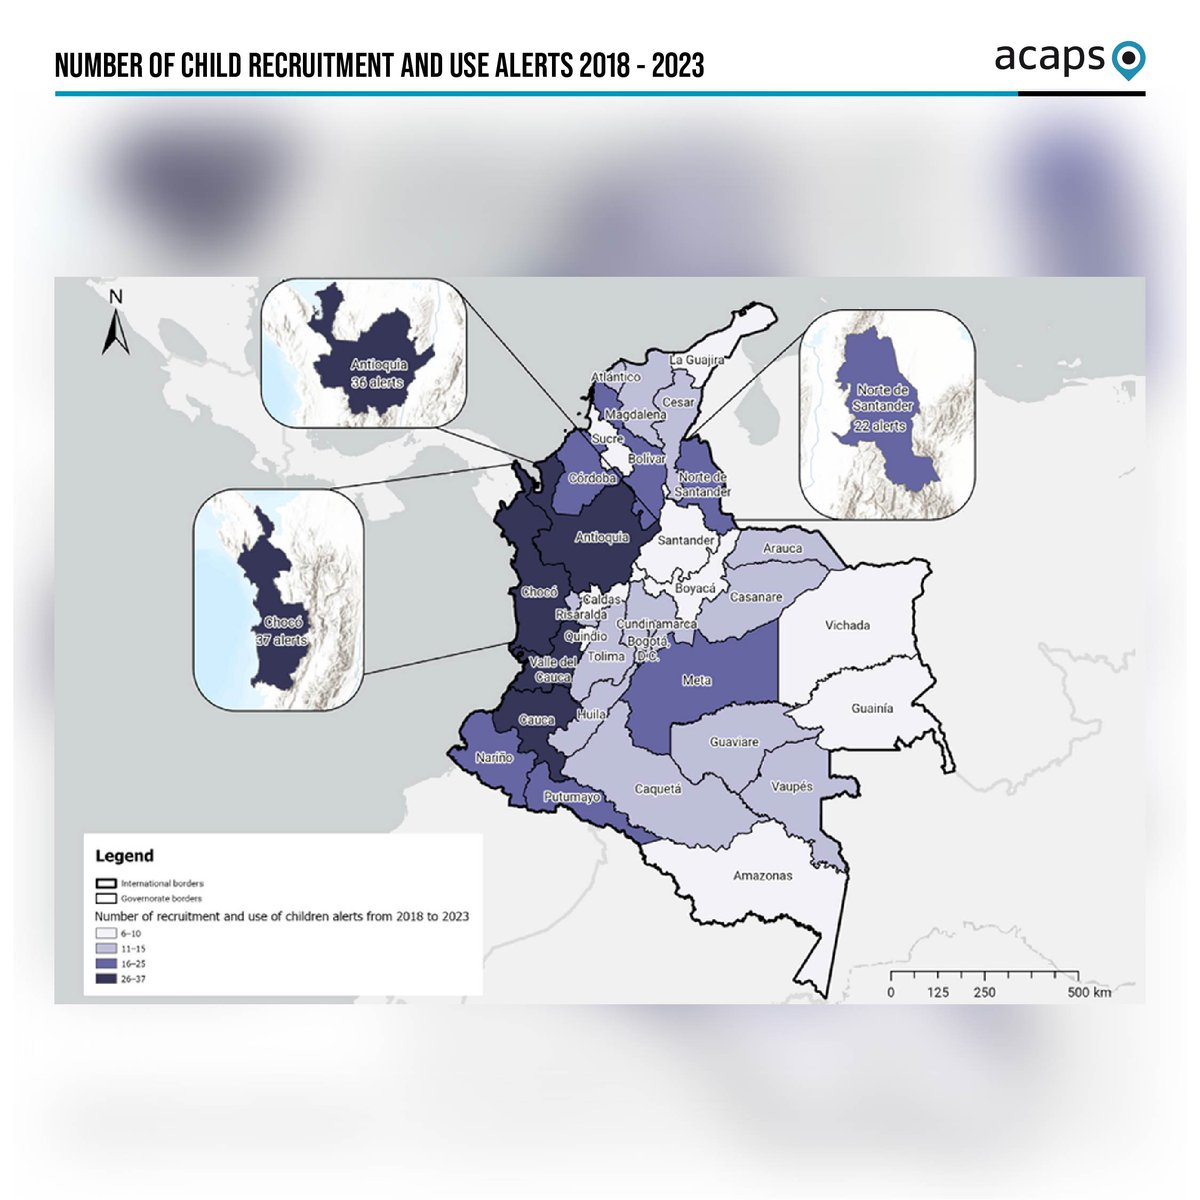 #Colombia: the lack of economic opportunities, state presence & infrastructure➕high levels of poverty are the most significant factors increasing a child’s vulnerability to recruitment & use by non-state armed groups & organised crime groups. 🆕analysis acaps.org/en/countries/a…